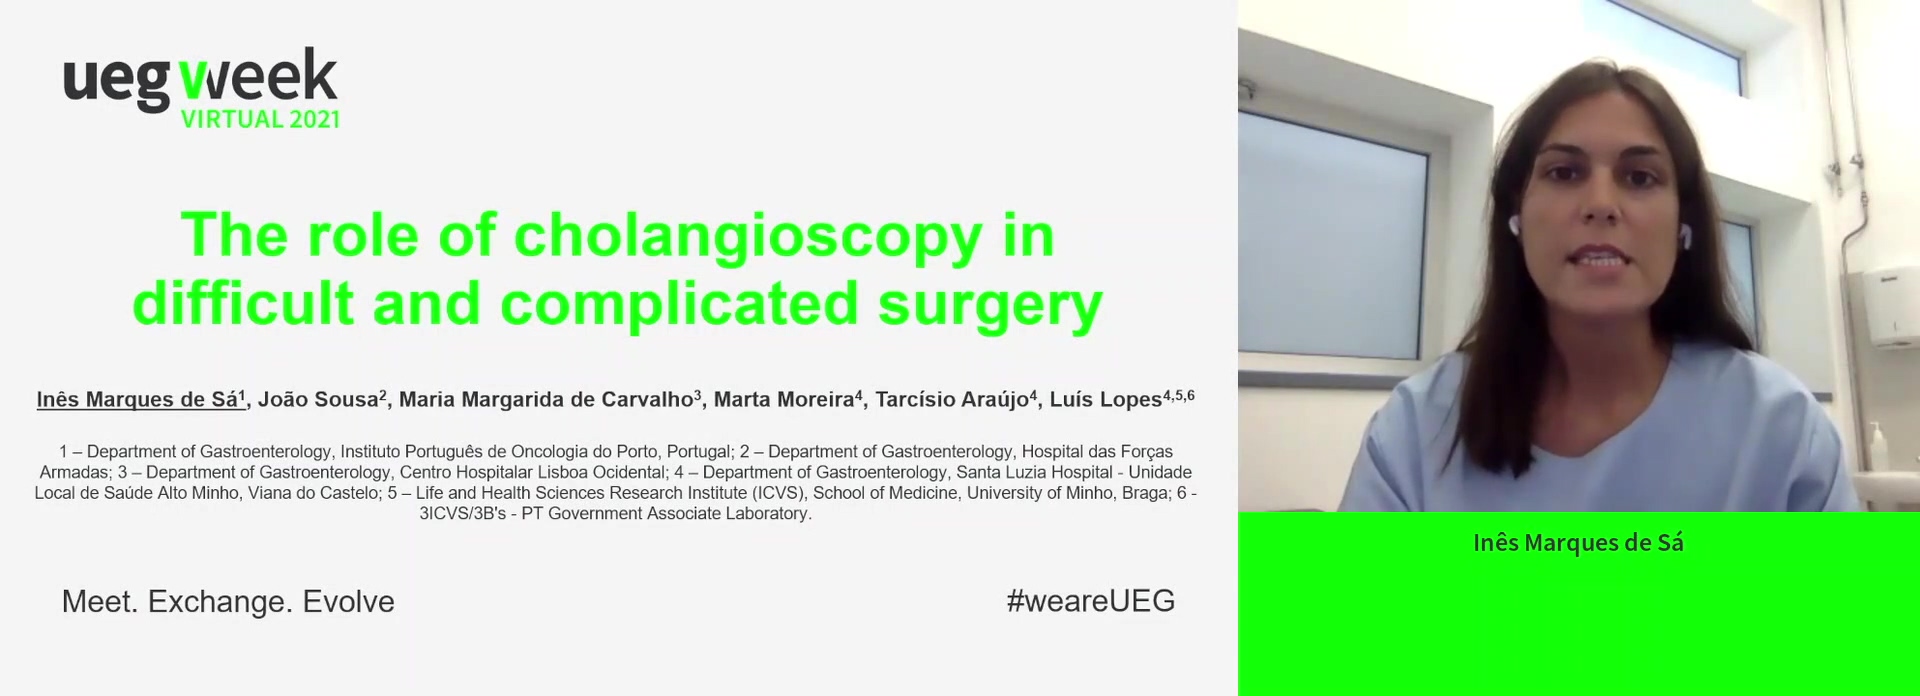 THE ROLE OF CHOLANGIOSCOPY IN DIFFICULT AND COMPLICATED SURGERY